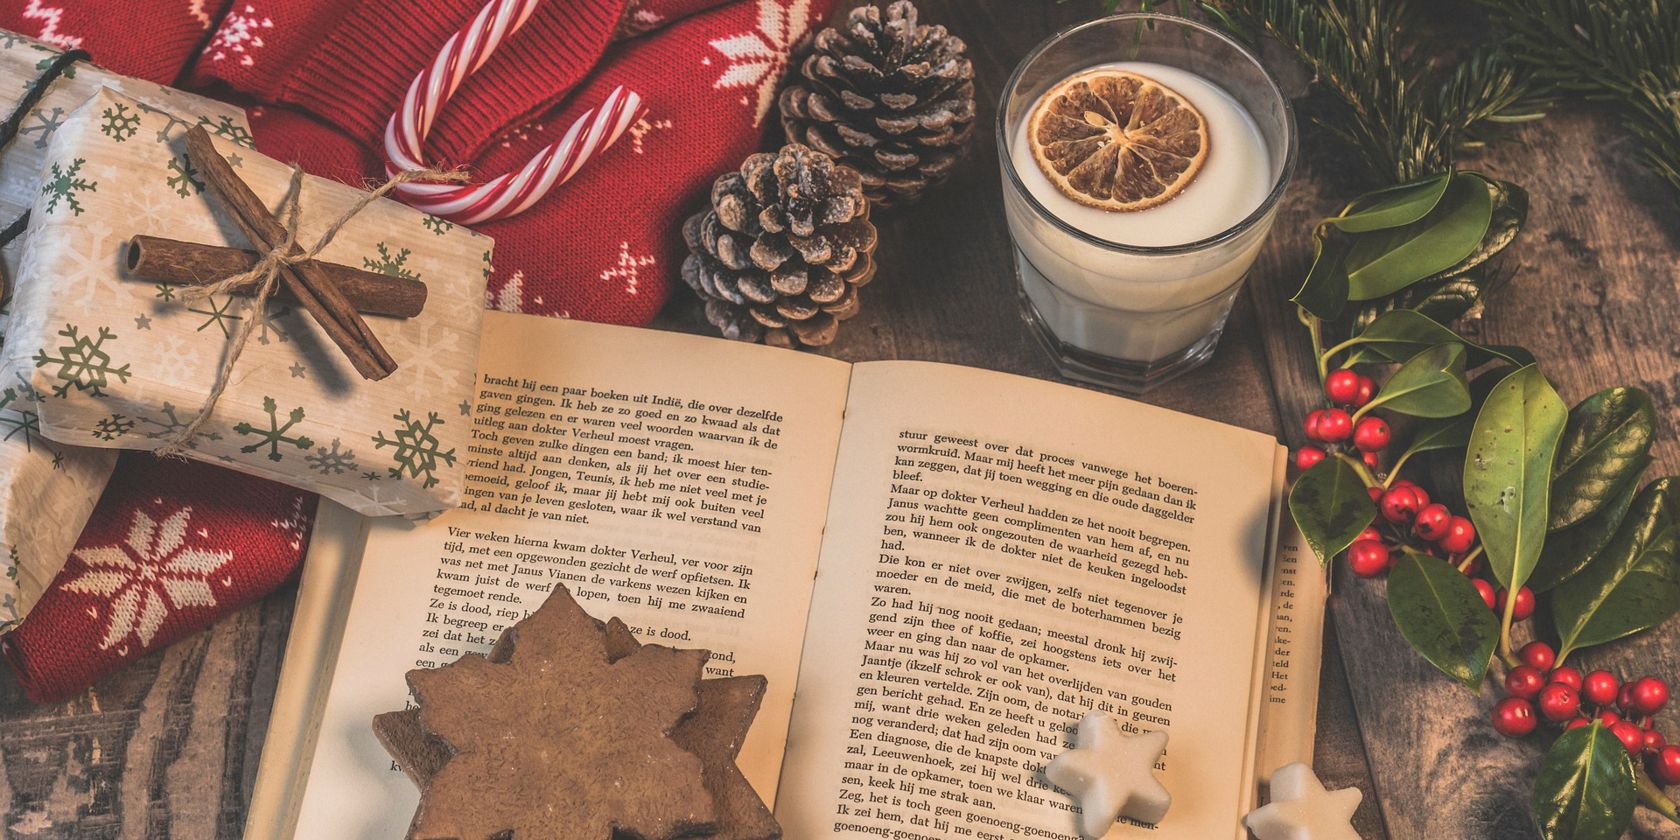 You are currently viewing The 11 Best Digital Gifts for Book Lovers
<span class="bsf-rt-reading-time"><span class="bsf-rt-display-label" prefix=""></span> <span class="bsf-rt-display-time" reading_time="1"></span> <span class="bsf-rt-display-postfix" postfix="min read"></span></span><!-- .bsf-rt-reading-time -->